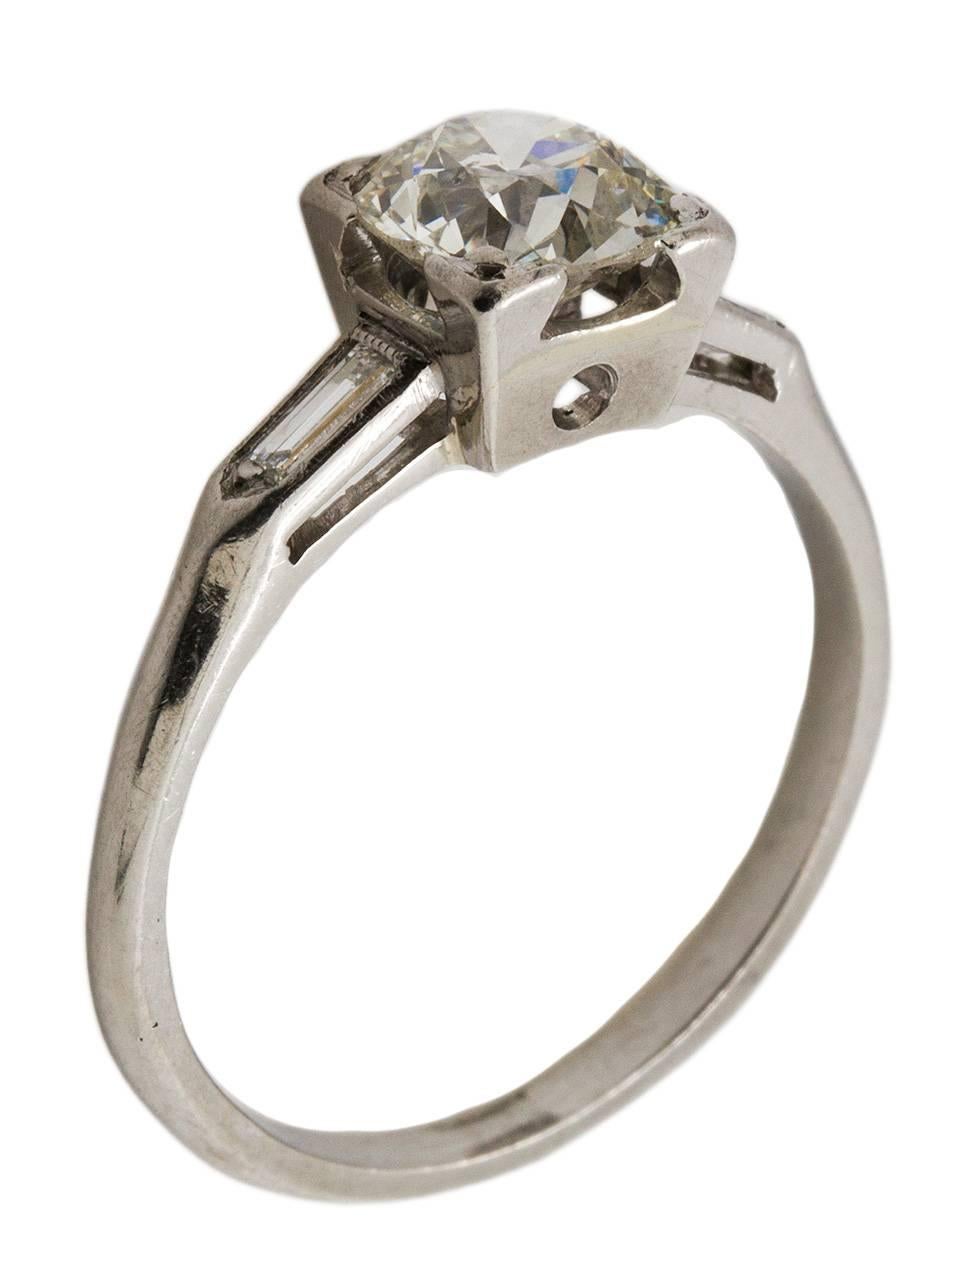 Absolutely gorgeous antique platinum engagement ring with a very lively .85ct Old European Cut center diamond, G color (near colorless)/SI1 clarity. This lovely mounting has an elevated center setting, with open side galleries, a tapered shank and